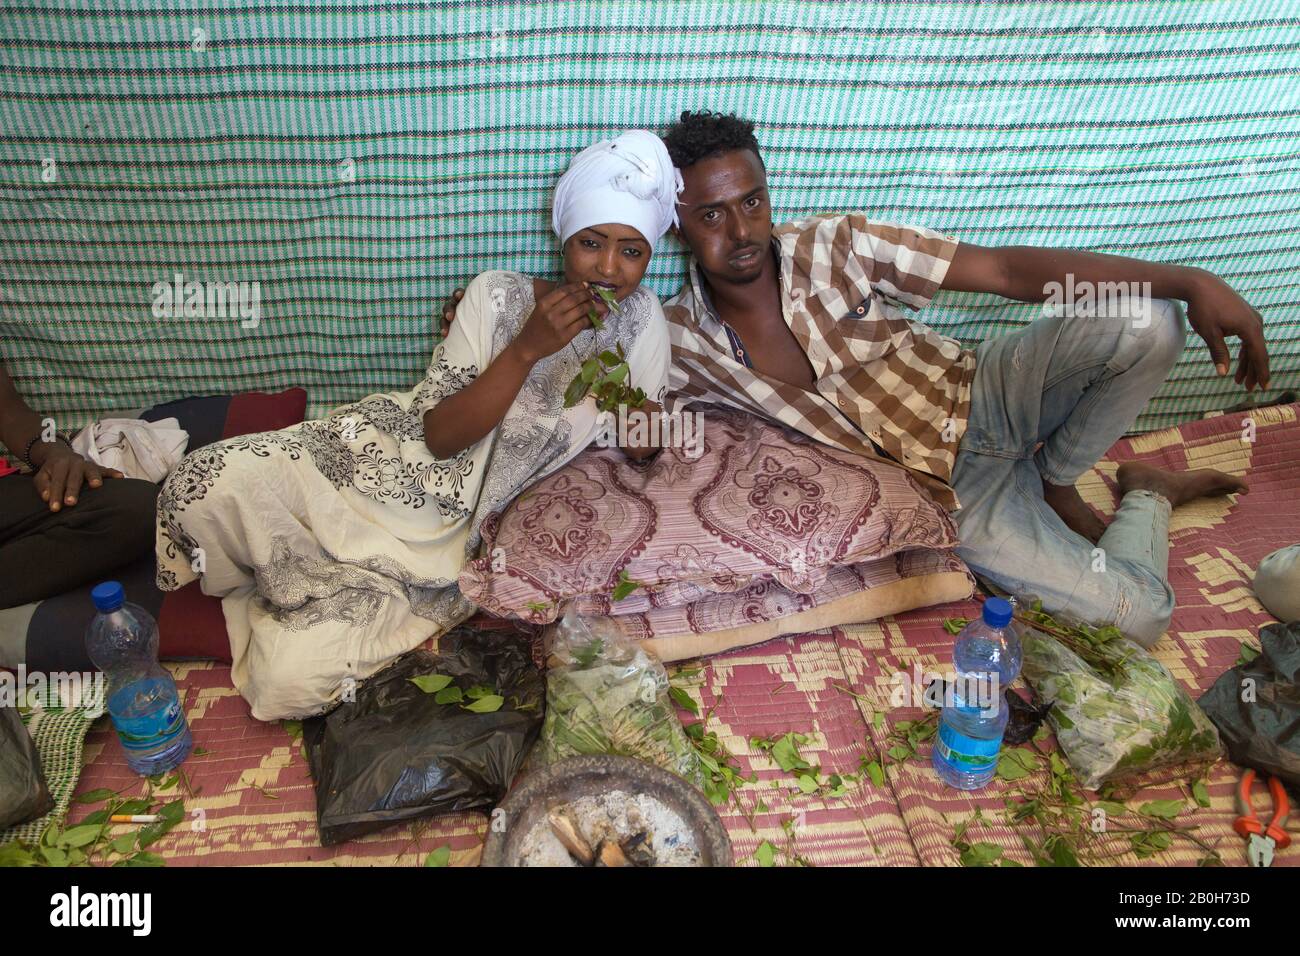 02.11.2019, Adama, Oromiyaa, Ethiopia - A woman and a man sit on the floor chewing khat. The woman holds a khat branch. 8000 IDPs from the Somalia reg Stock Photo